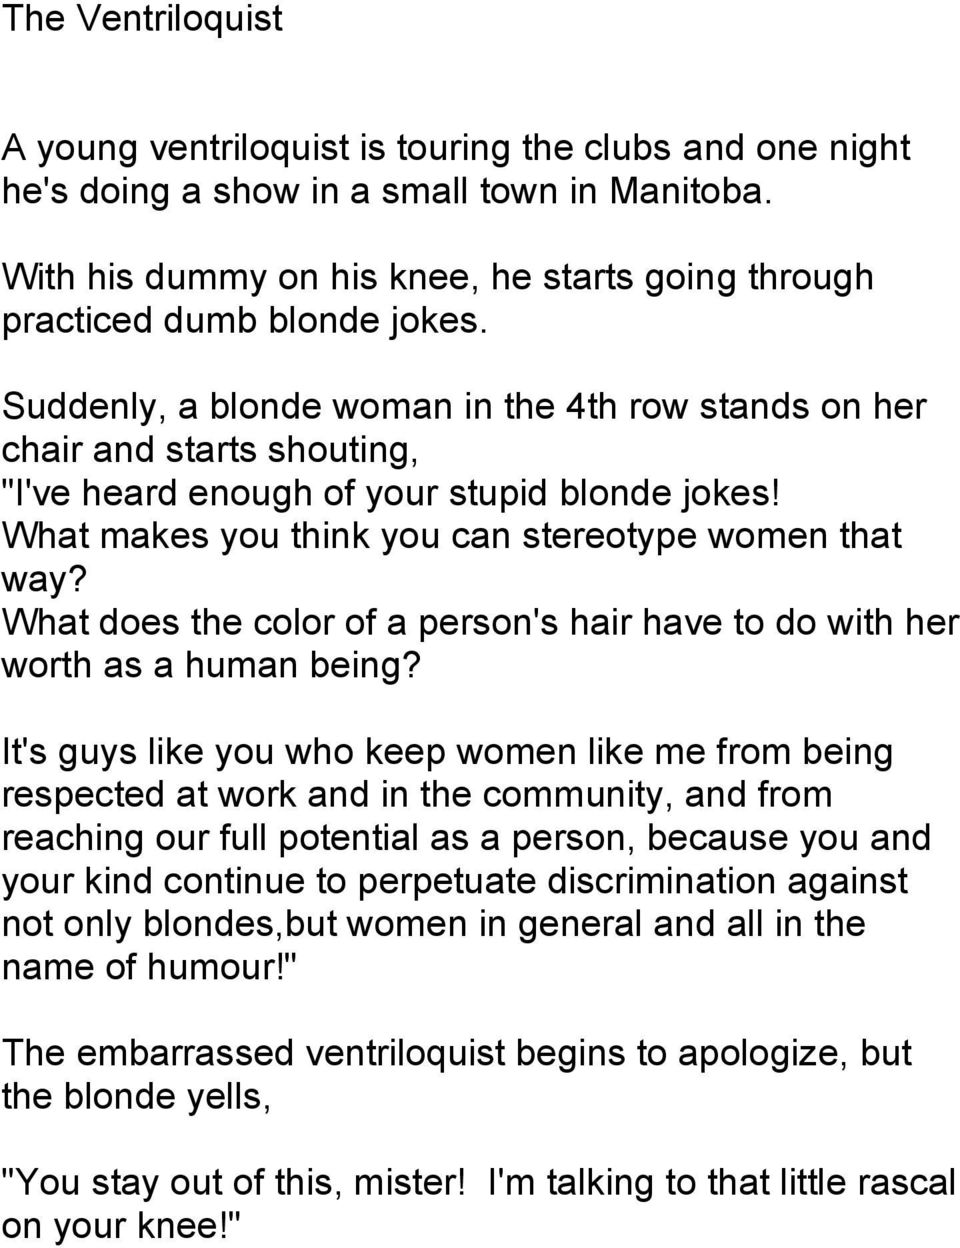 Suddenly, a blonde woman in the 4th row stands on her chair and starts shouting, "I've heard enough of your stupid blonde jokes! What makes you think you can stereotype women that way?